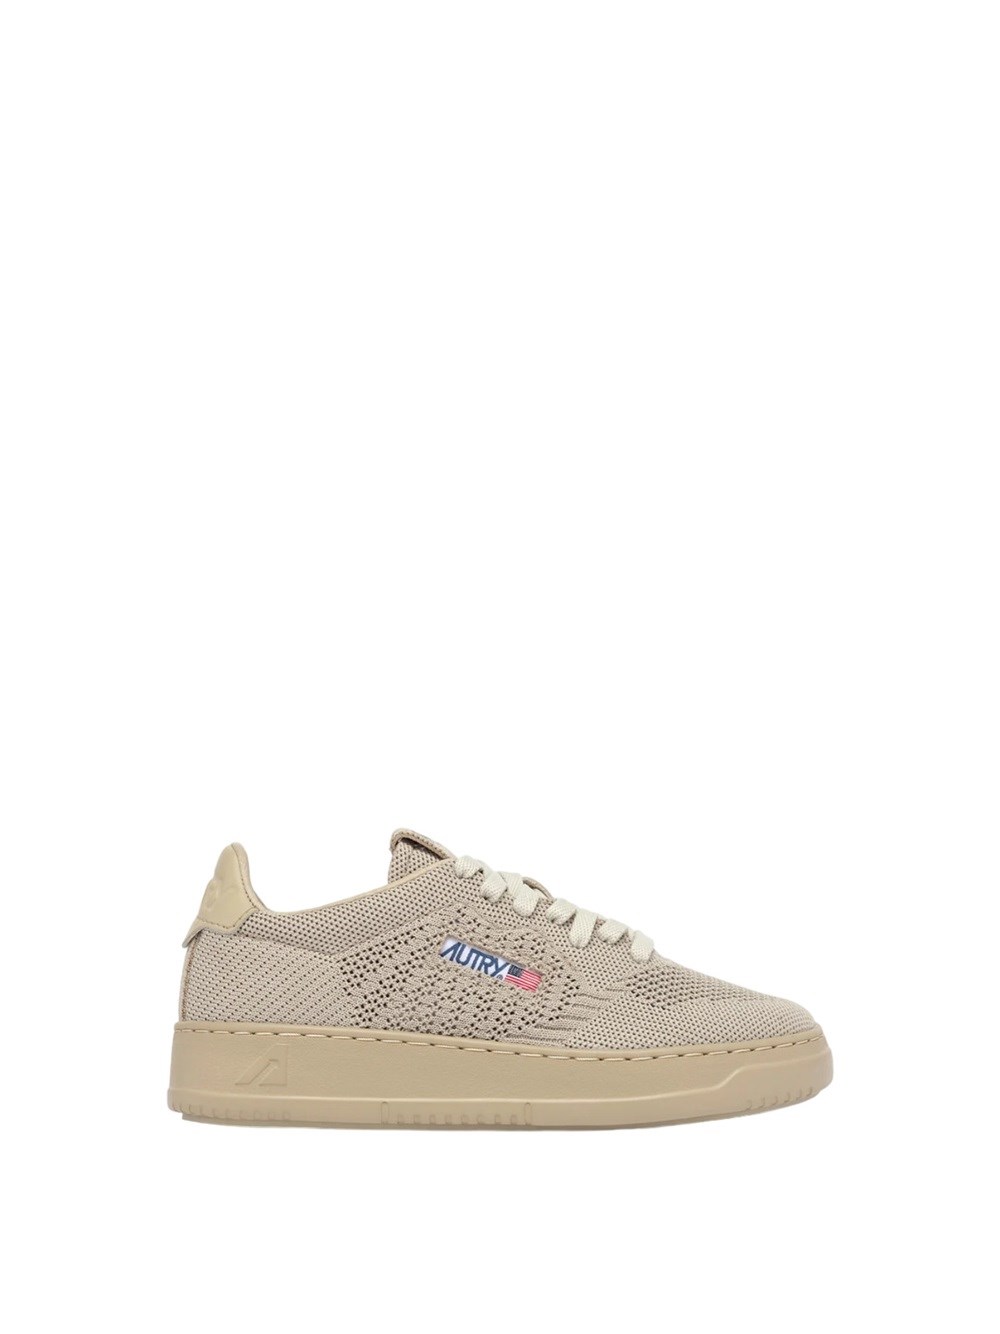 AUTRY EASEKNIT LOW SNEAKERS IN MOJAVE DESERT COLOR FABRIC